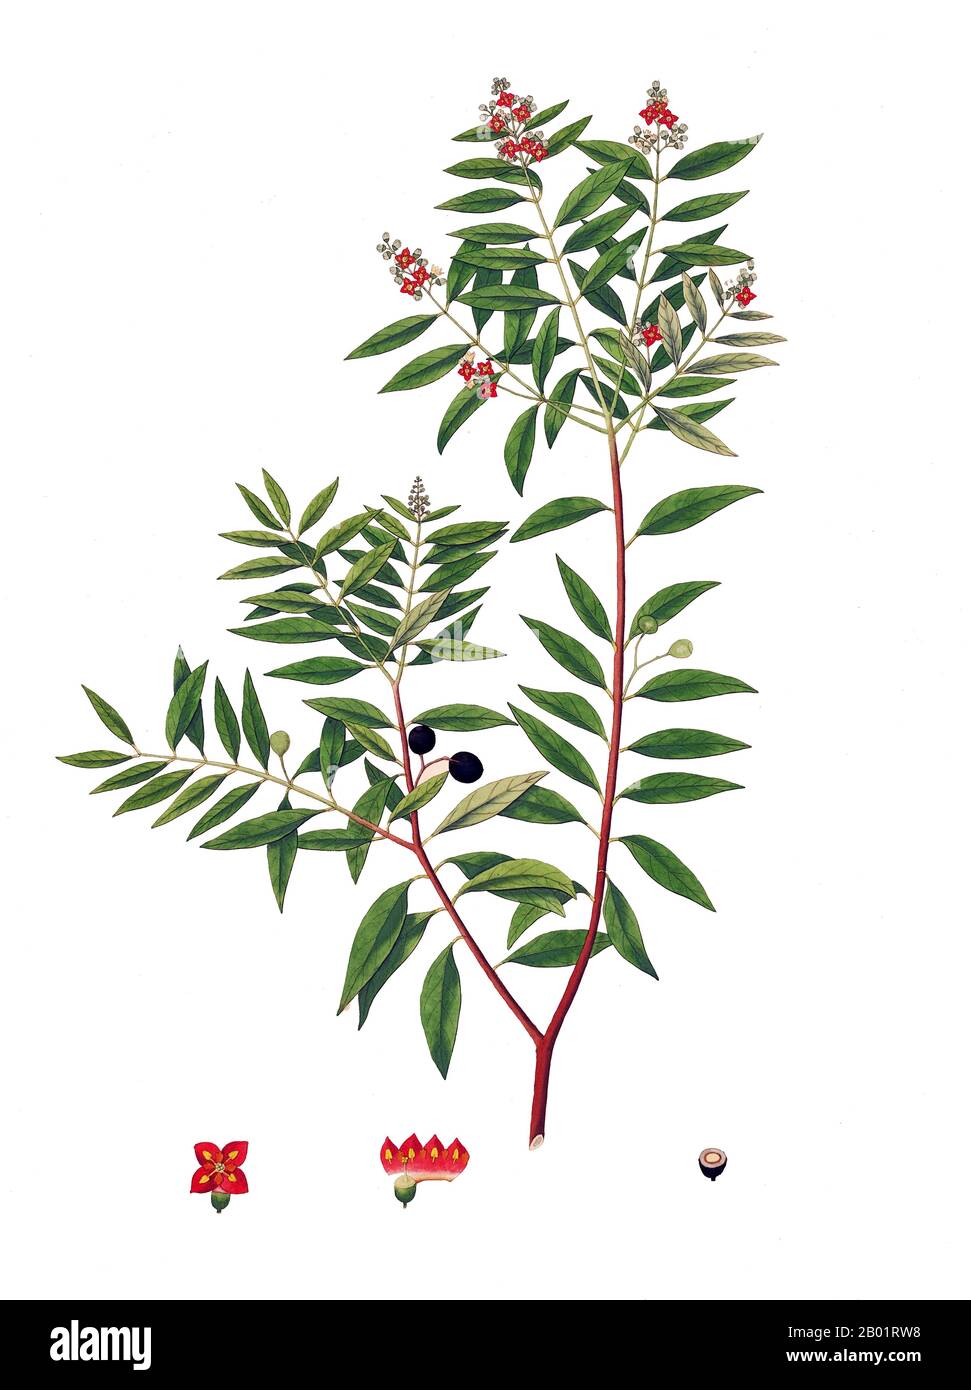 India/Scotland: Indian Sandalwood (Santalum Album). Illustration by William Roxburgh (29 June 1751 - 18 February 1815) from the 'Plants of the Coast of Coromandel', 1795.  Sandalwoods are medium-sized hemiparasitic trees. Notable members of this group are Indian sandalwood (Santalum album) and Australian sandalwood (Santalum spicatum). Others in the genus species have fragrant wood. These are found in India, Bangladesh, Sri Lanka, Australia, Indonesia and the Pacific Islands. In India, Bangladesh and Sri Lanka it is called Chandan.  The woods are heavy, yellow and fine-grained. Stock Photo